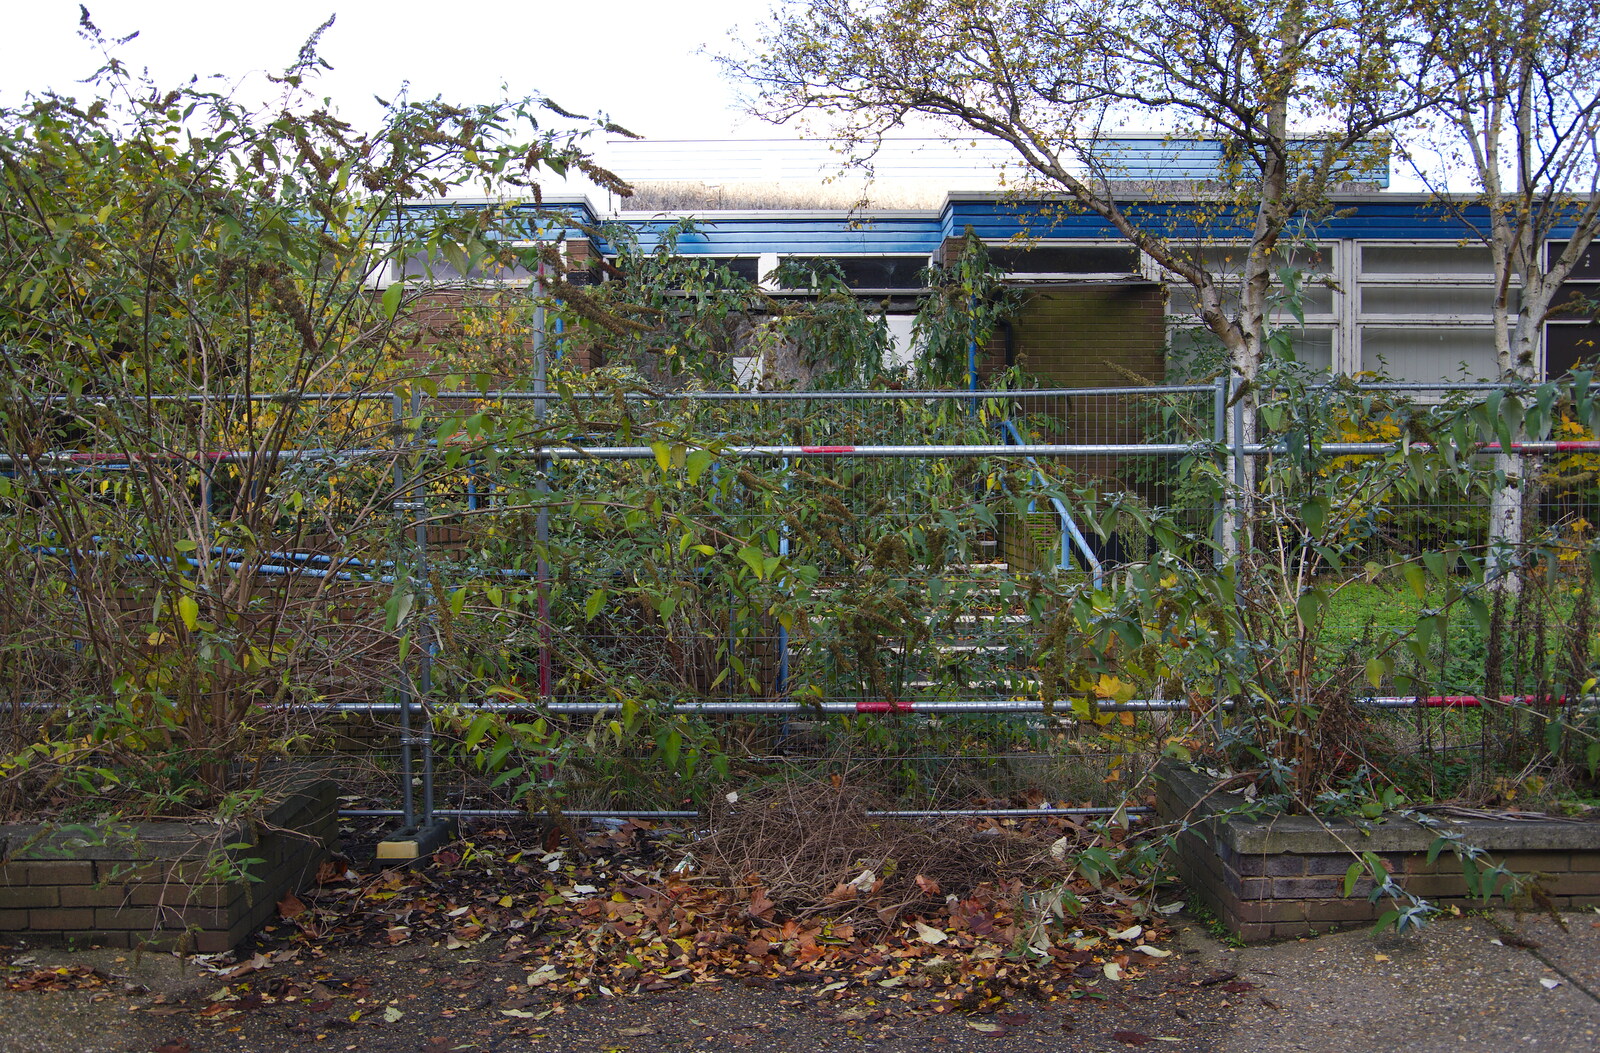 The front entrance has almost disappeared in foliage from Exam Day Dereliction, Ipswich, Suffolk - 13th November 2019